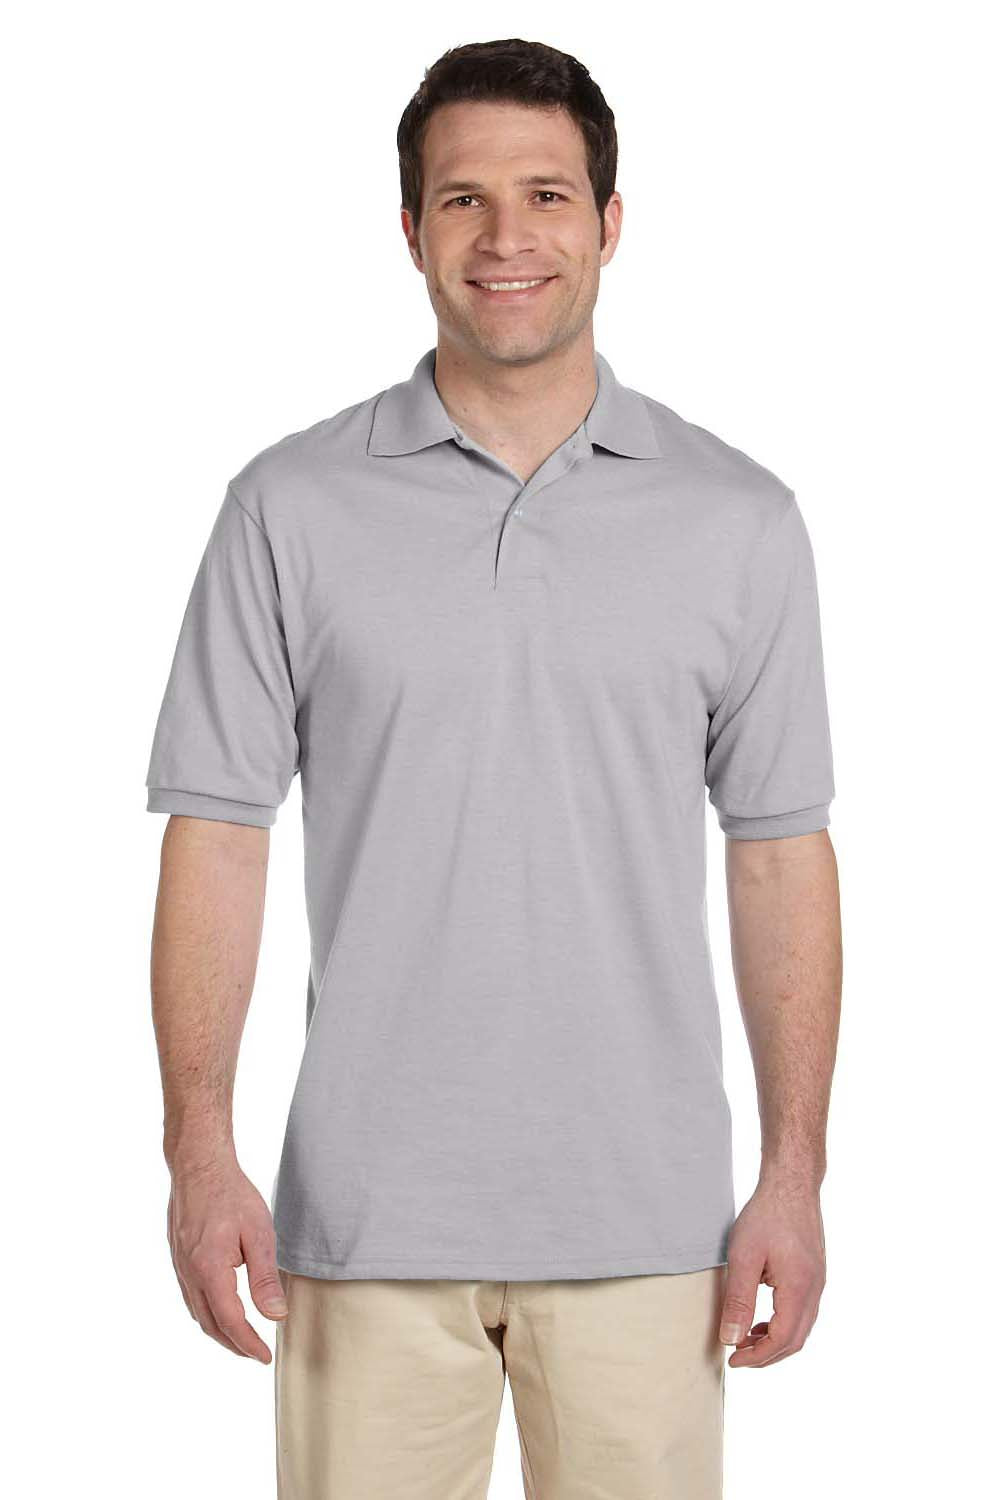 Jerzees 437 Mens SpotShield Stain Resistant Short Sleeve Polo Shirt Silver Grey Front